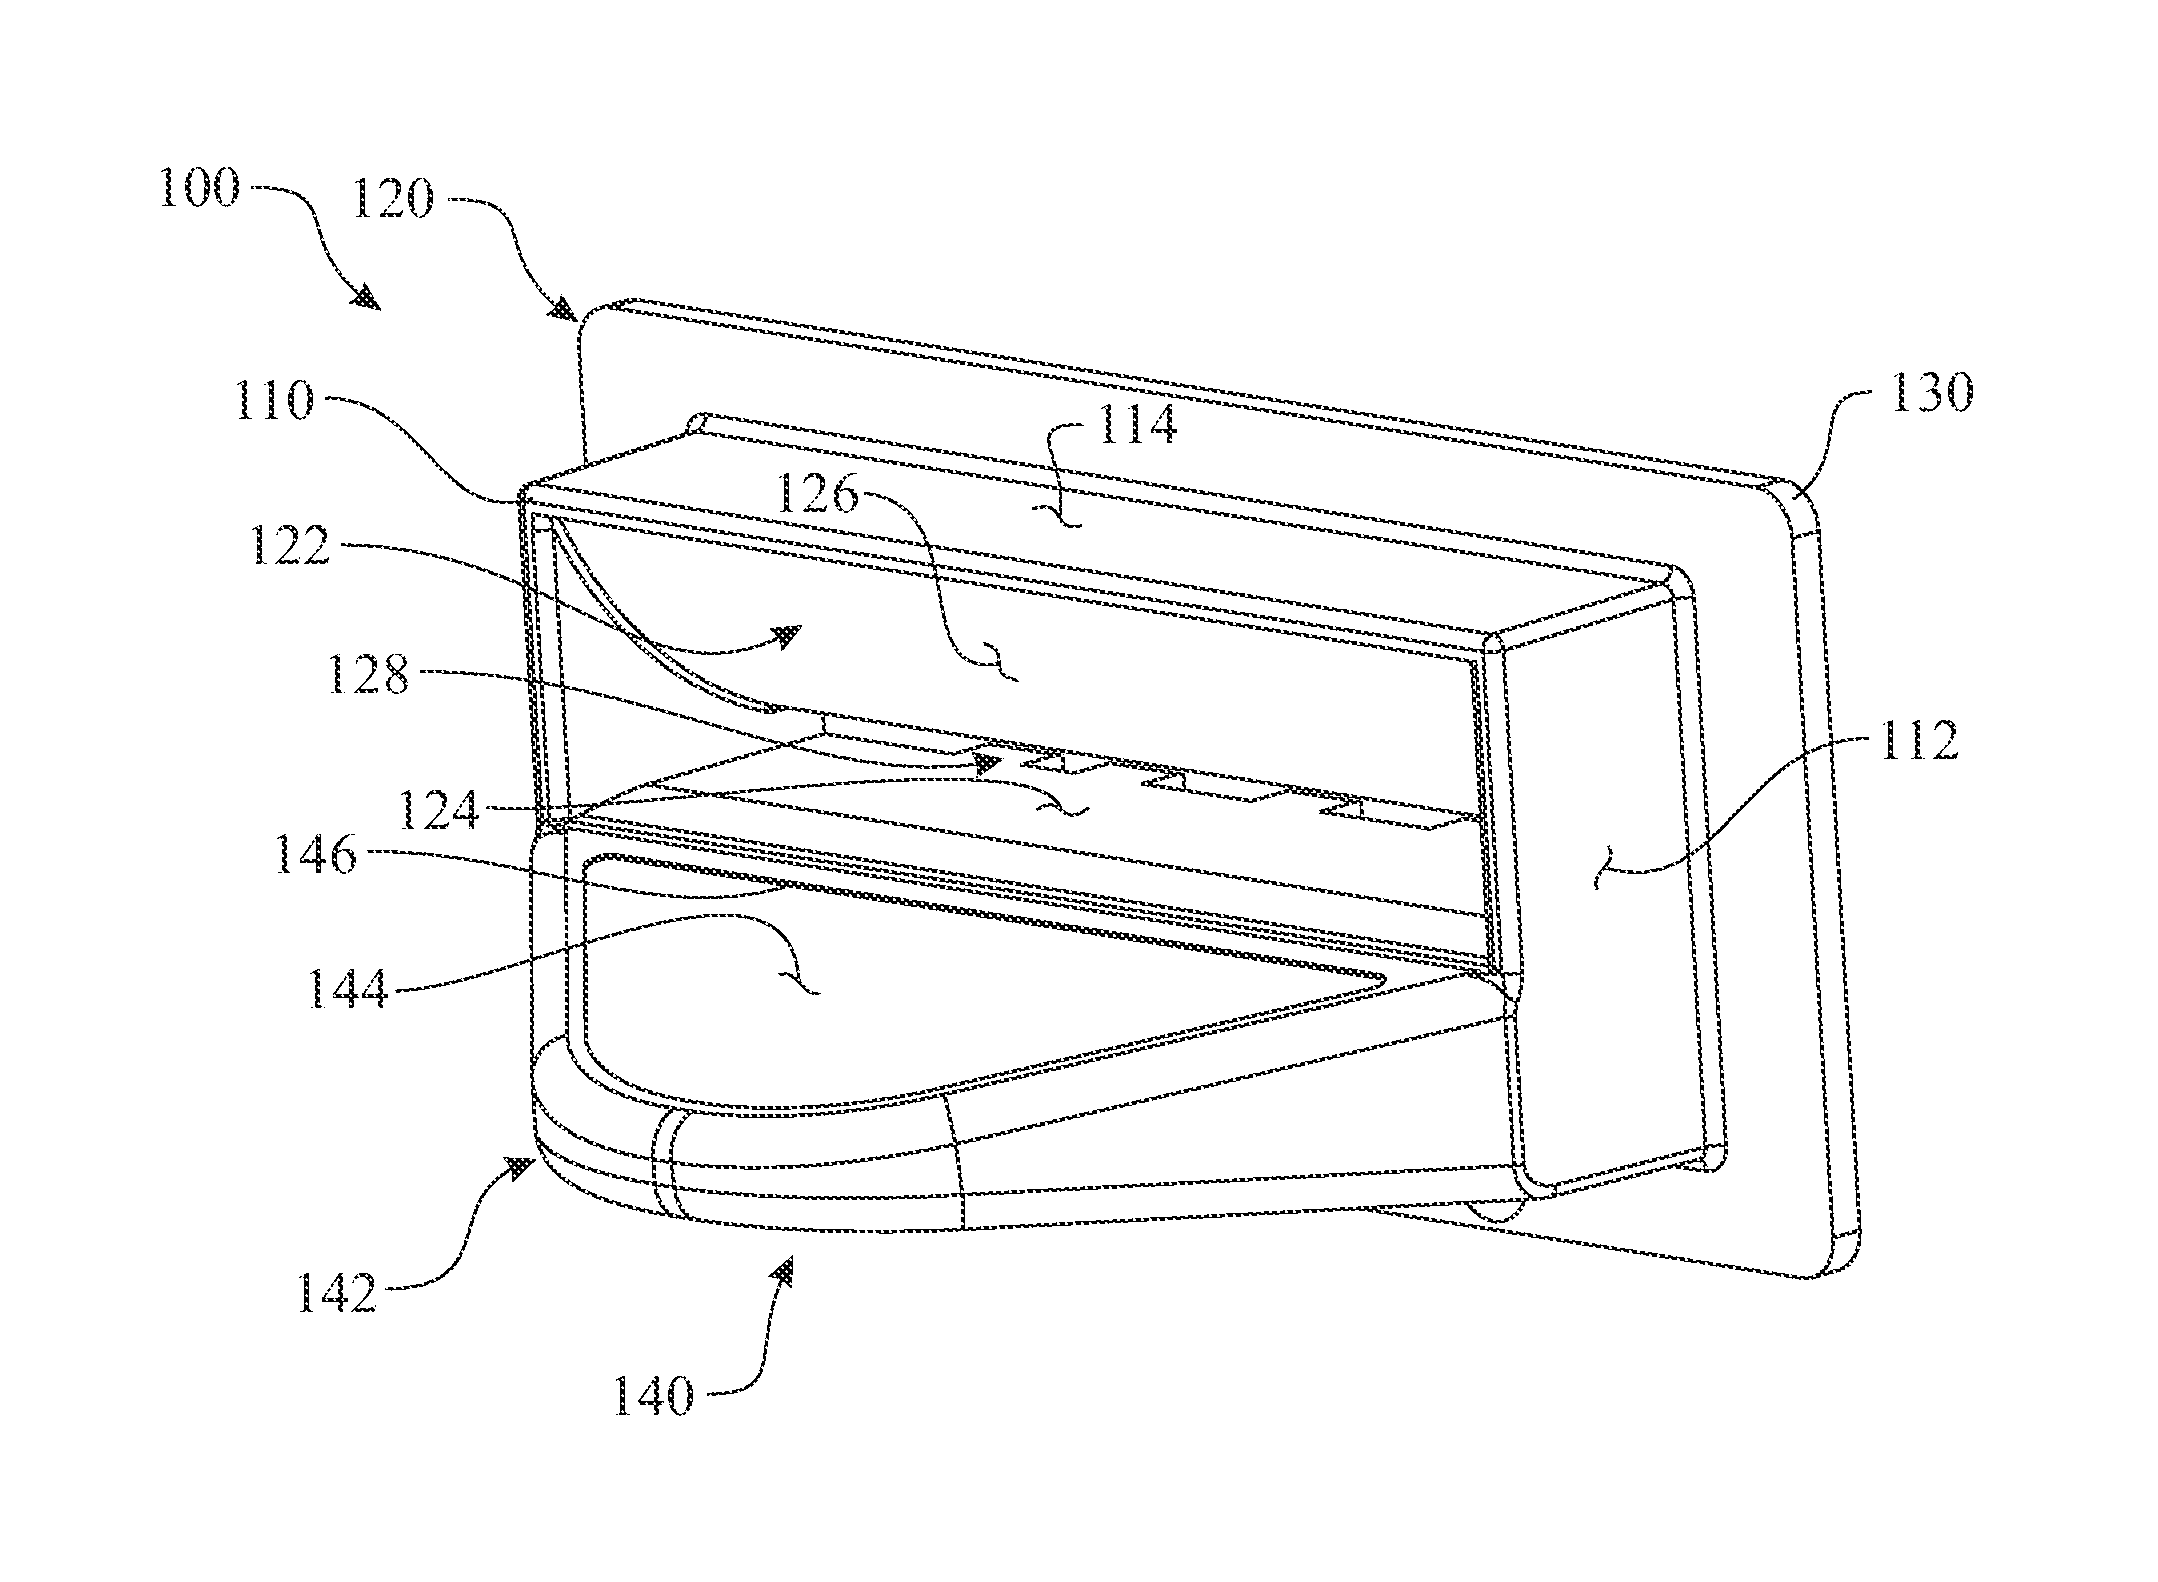 Bezel Assembly For Use with An Automated Transaction Device